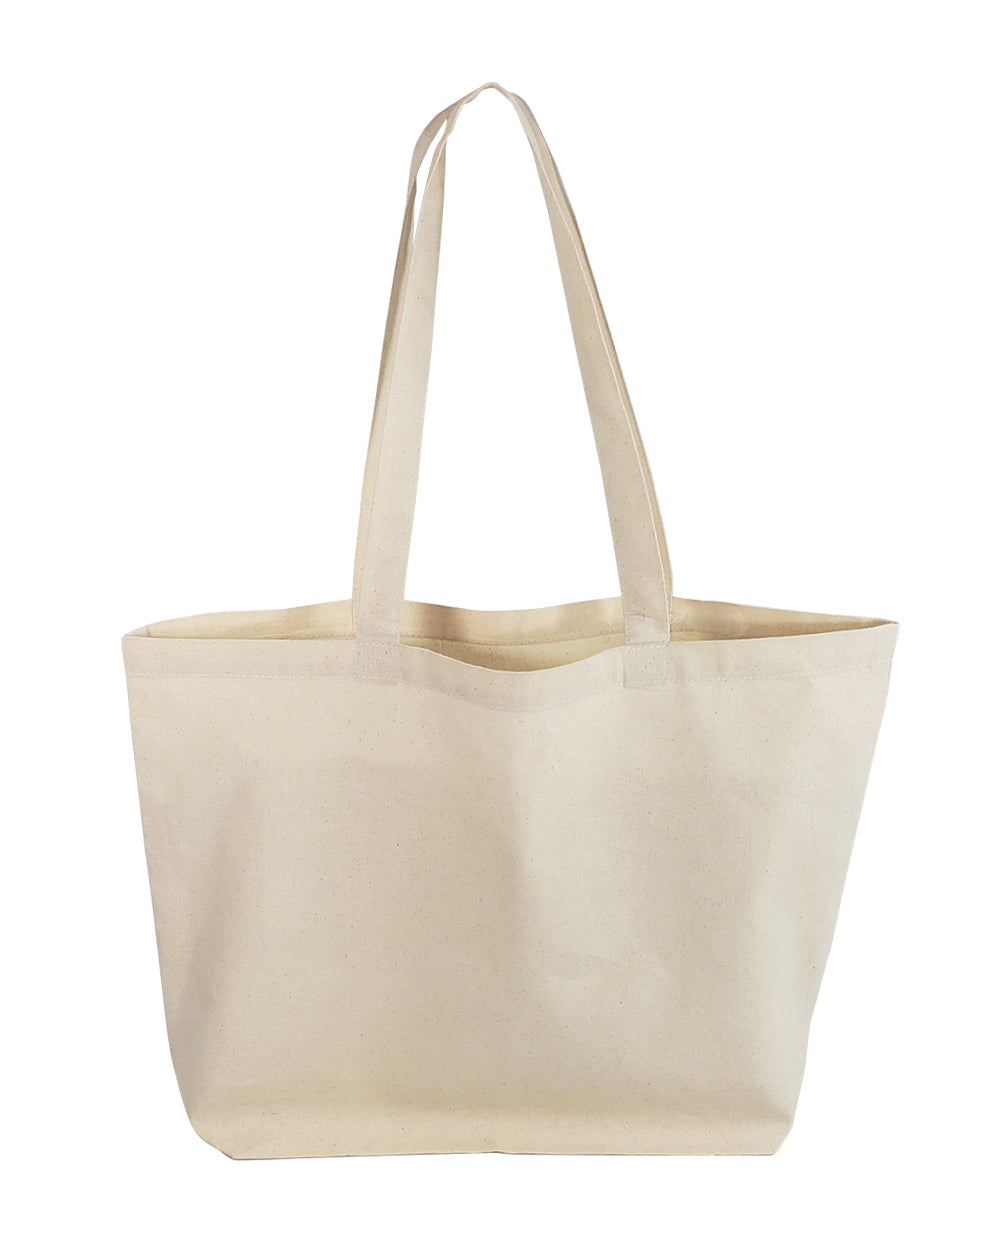 Natural Color Affordable Tote Bag by ToteBagFactory